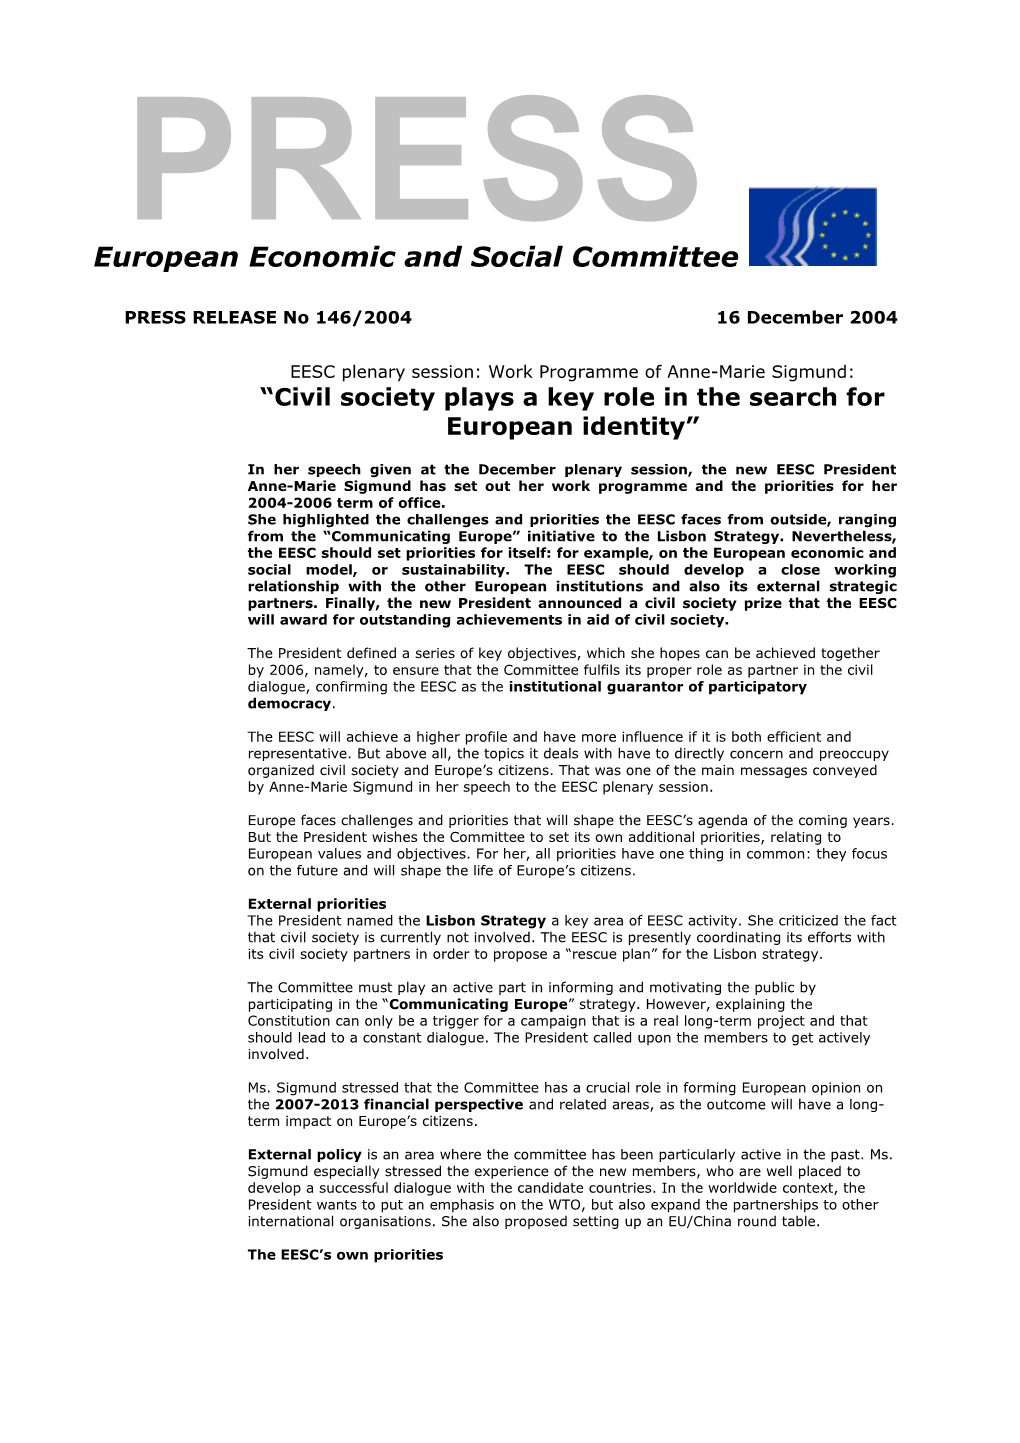 Civil Society Plays a Key Role in the Search for European Identity